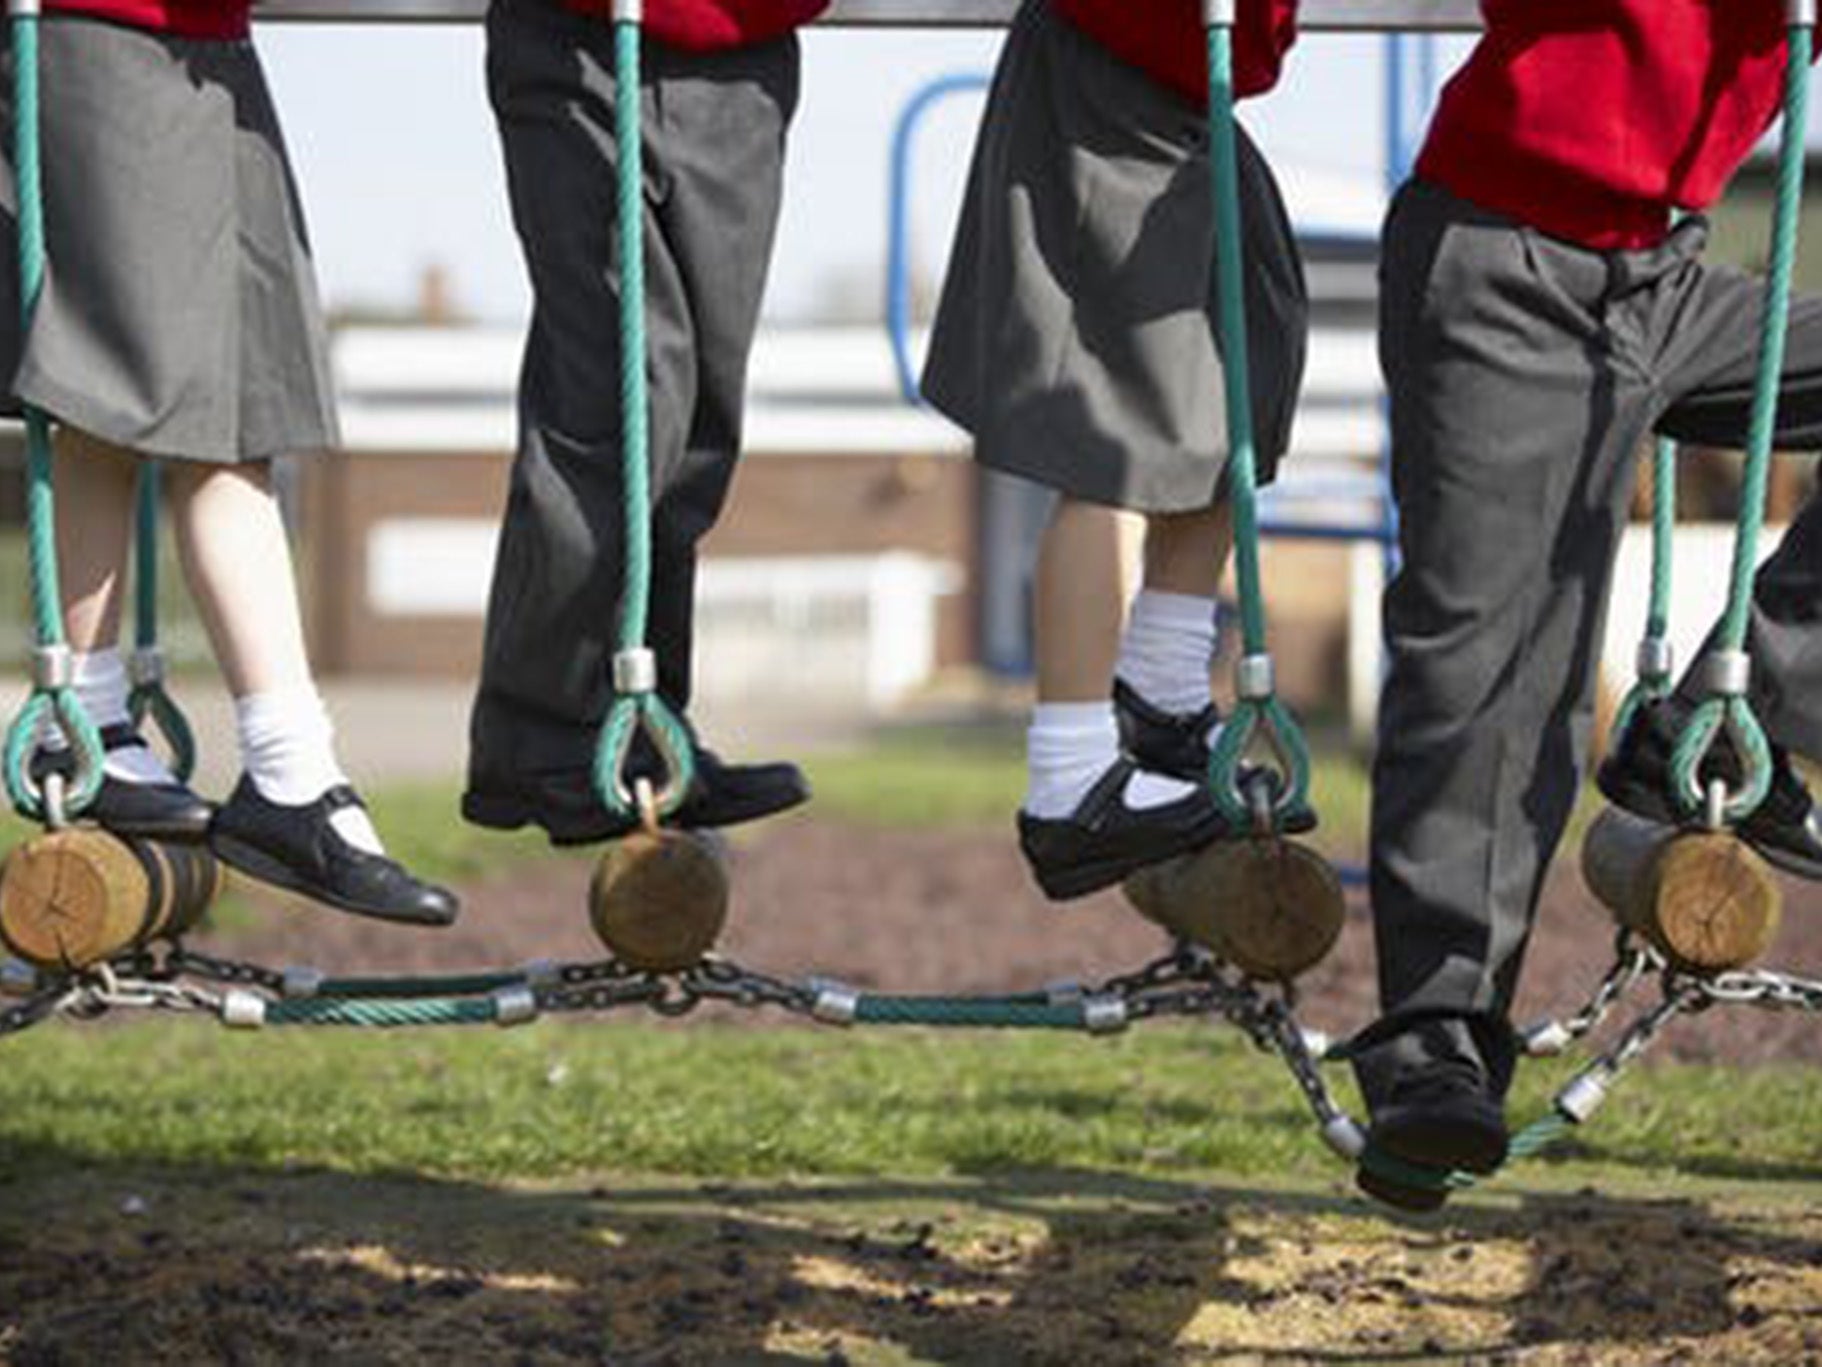 Serious investment in the futures of children across the country should be ‘at the top of the intray’ for the education secretary, say campaigners